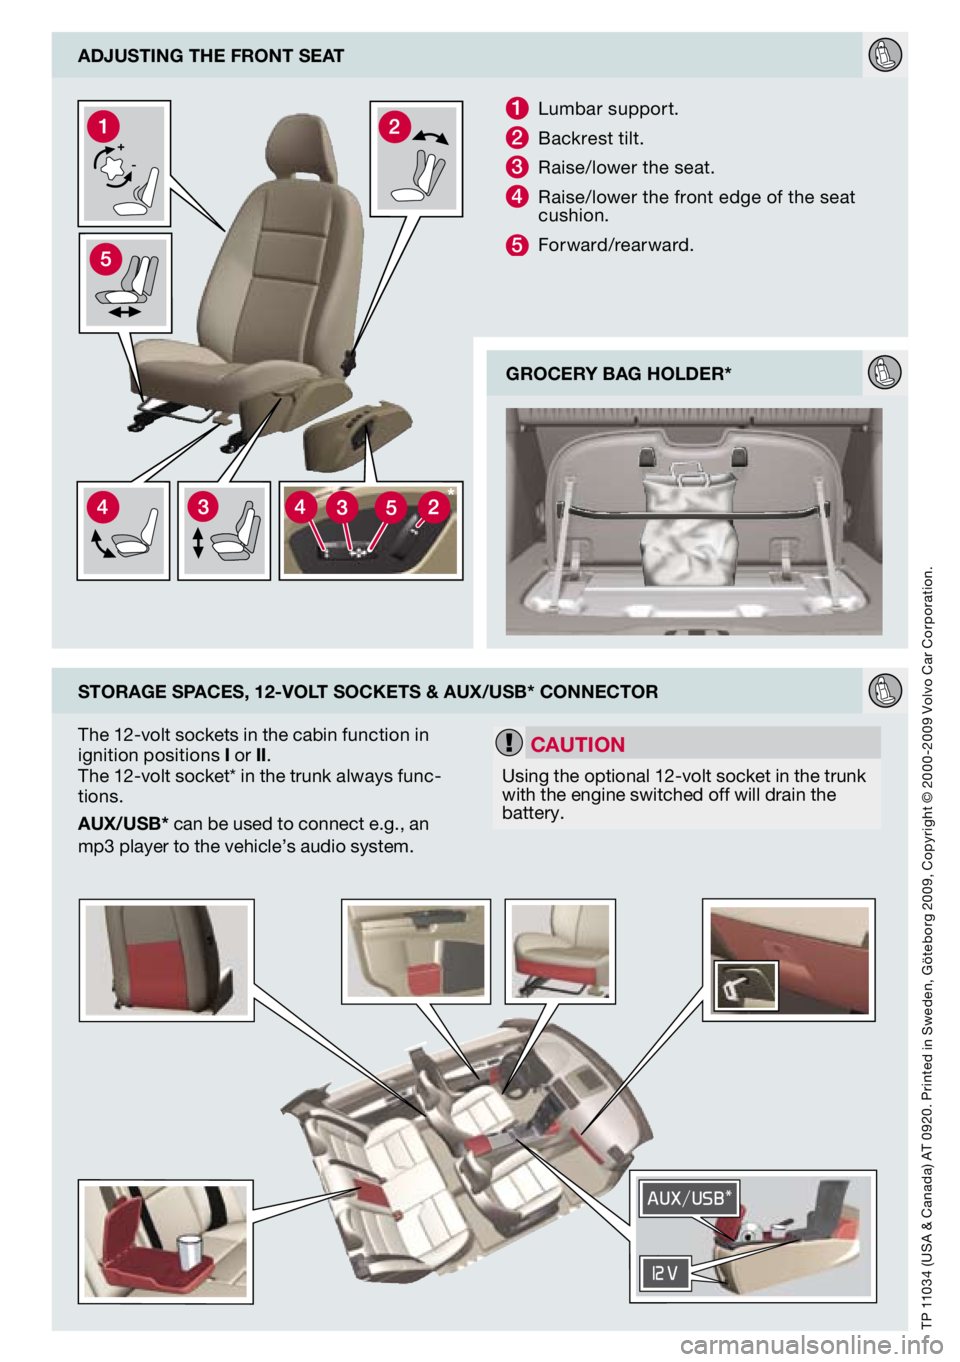 VOLVO S40 2010  Quick Guide 
adjUStIng the Front Seat
Storage SpaceS, 12-volt SocketS & aUX/USb* connector
1  lumbar support.
2  b ackrest tilt.
3 Raise/lower the seat.
4 Raise/lower the front edge of the seat cushion.
5 Forward